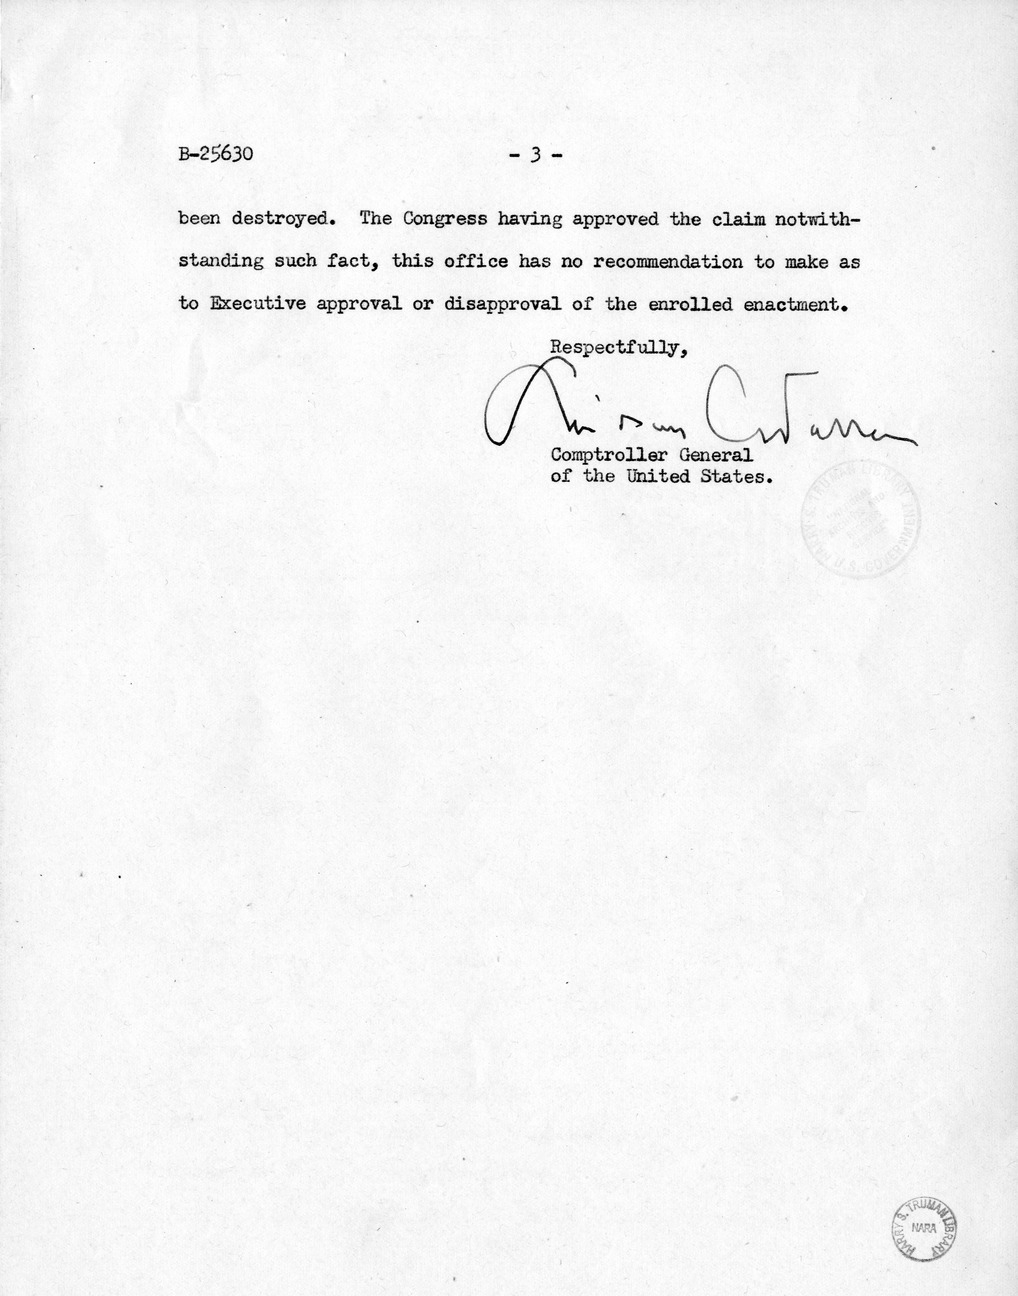 Memorandum from Frederick J. Bailey to M. C. Latta, H.R. 1560, For the Relief of J.B. Grigsby, with Attachments